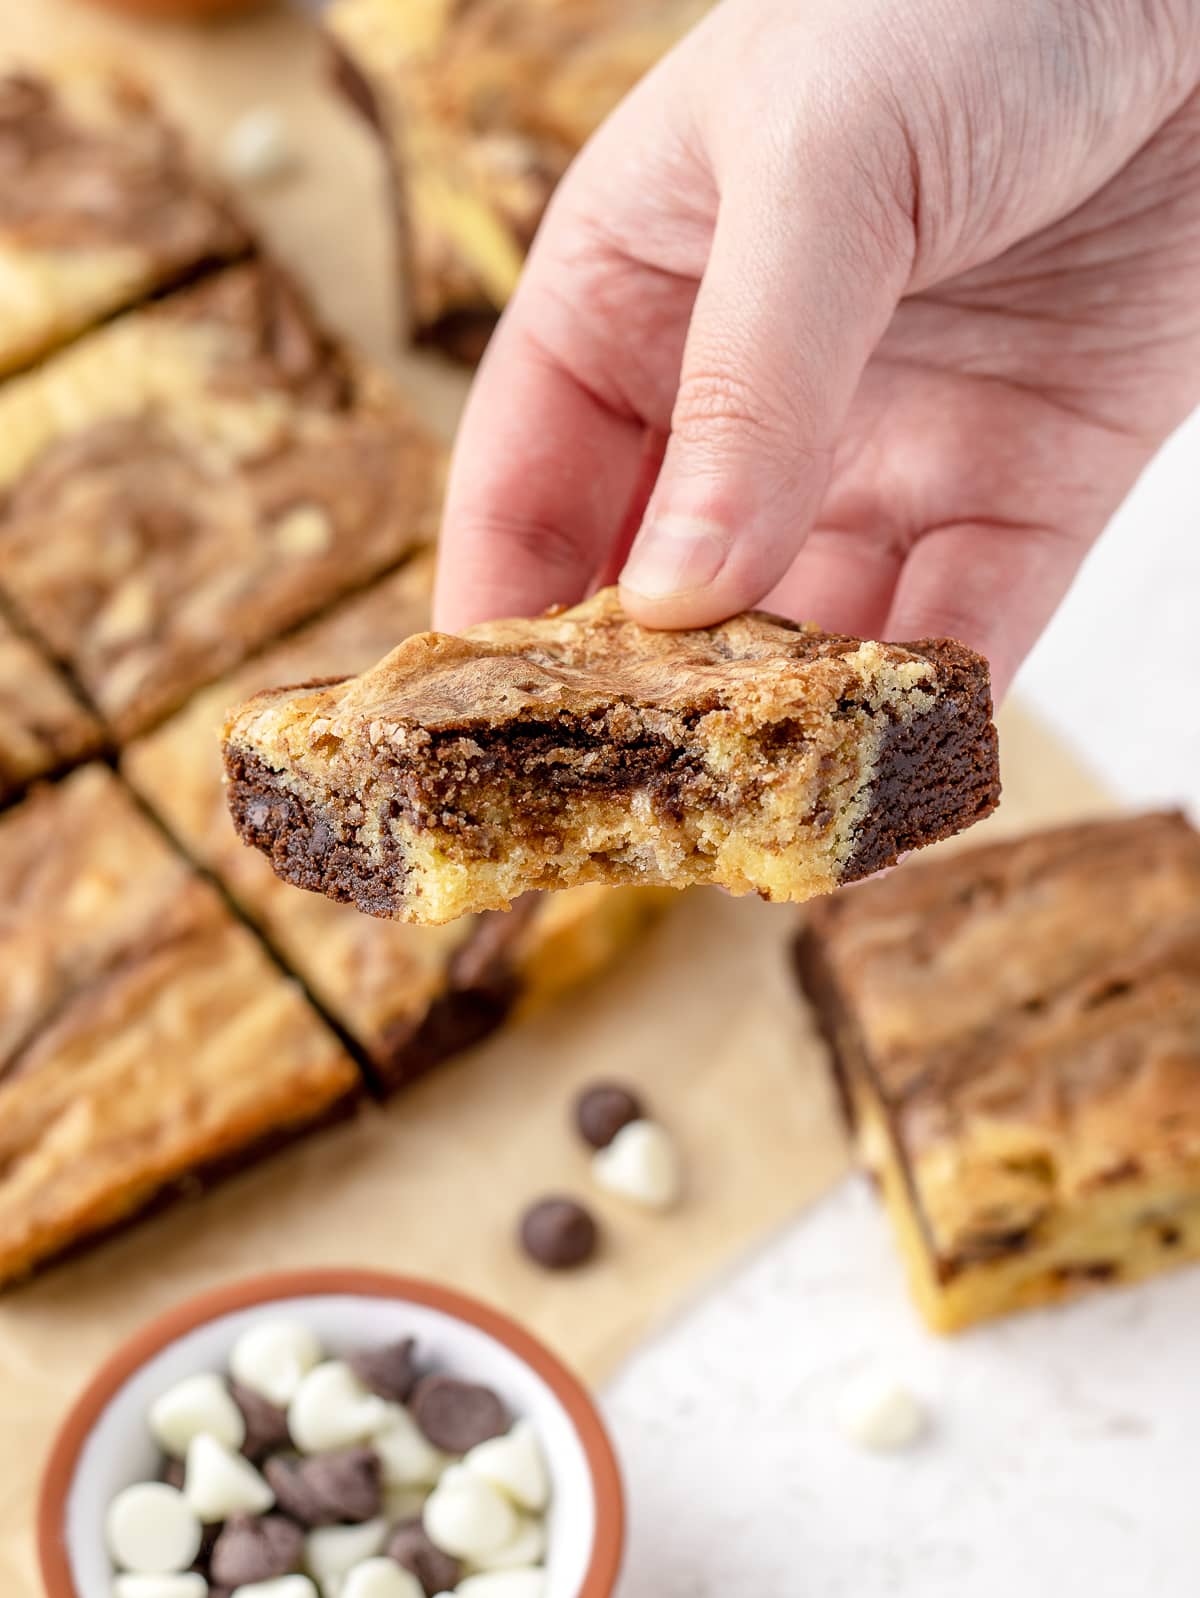 Hand holding a Brownie Blondie to see the swirls of flavor and chocolate chips.